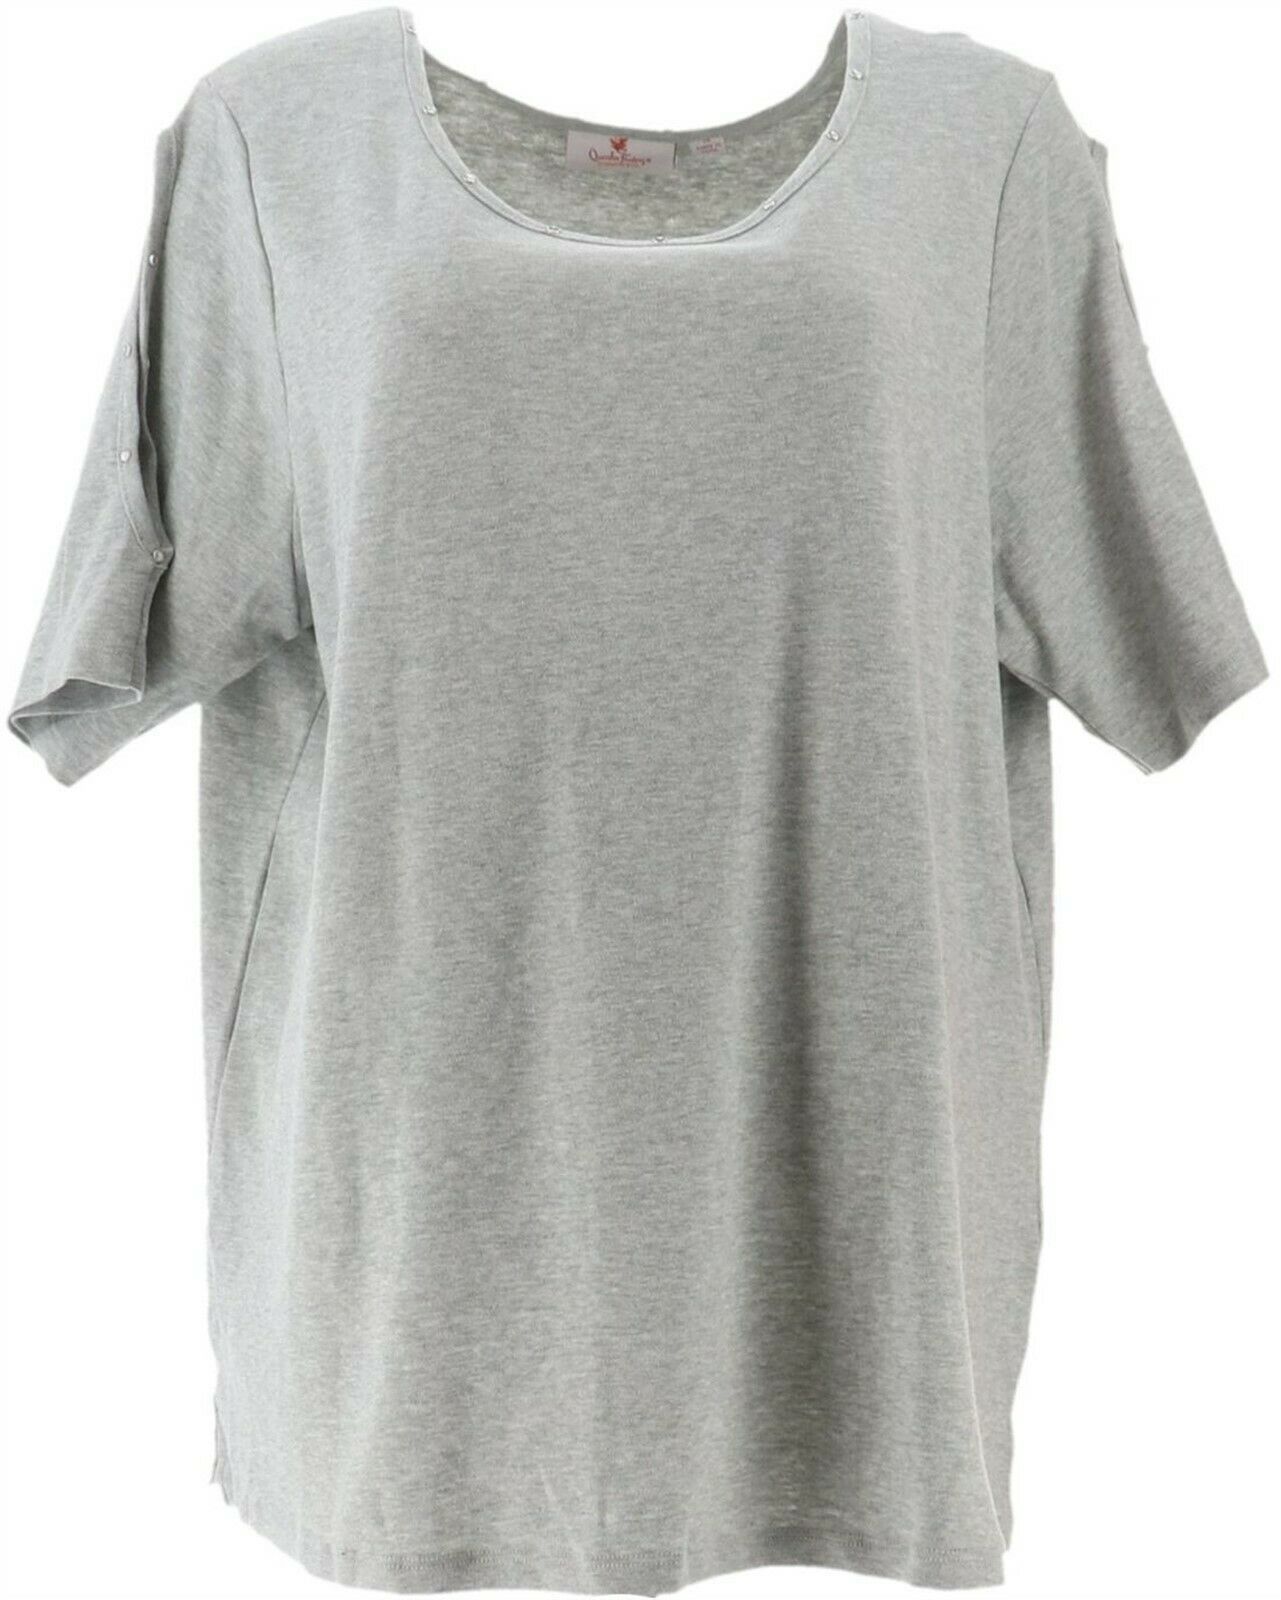 Quacker Factory 2Pc Cold Shoulder Knit T-shirts UltraPk HthrGry S NEW A289688